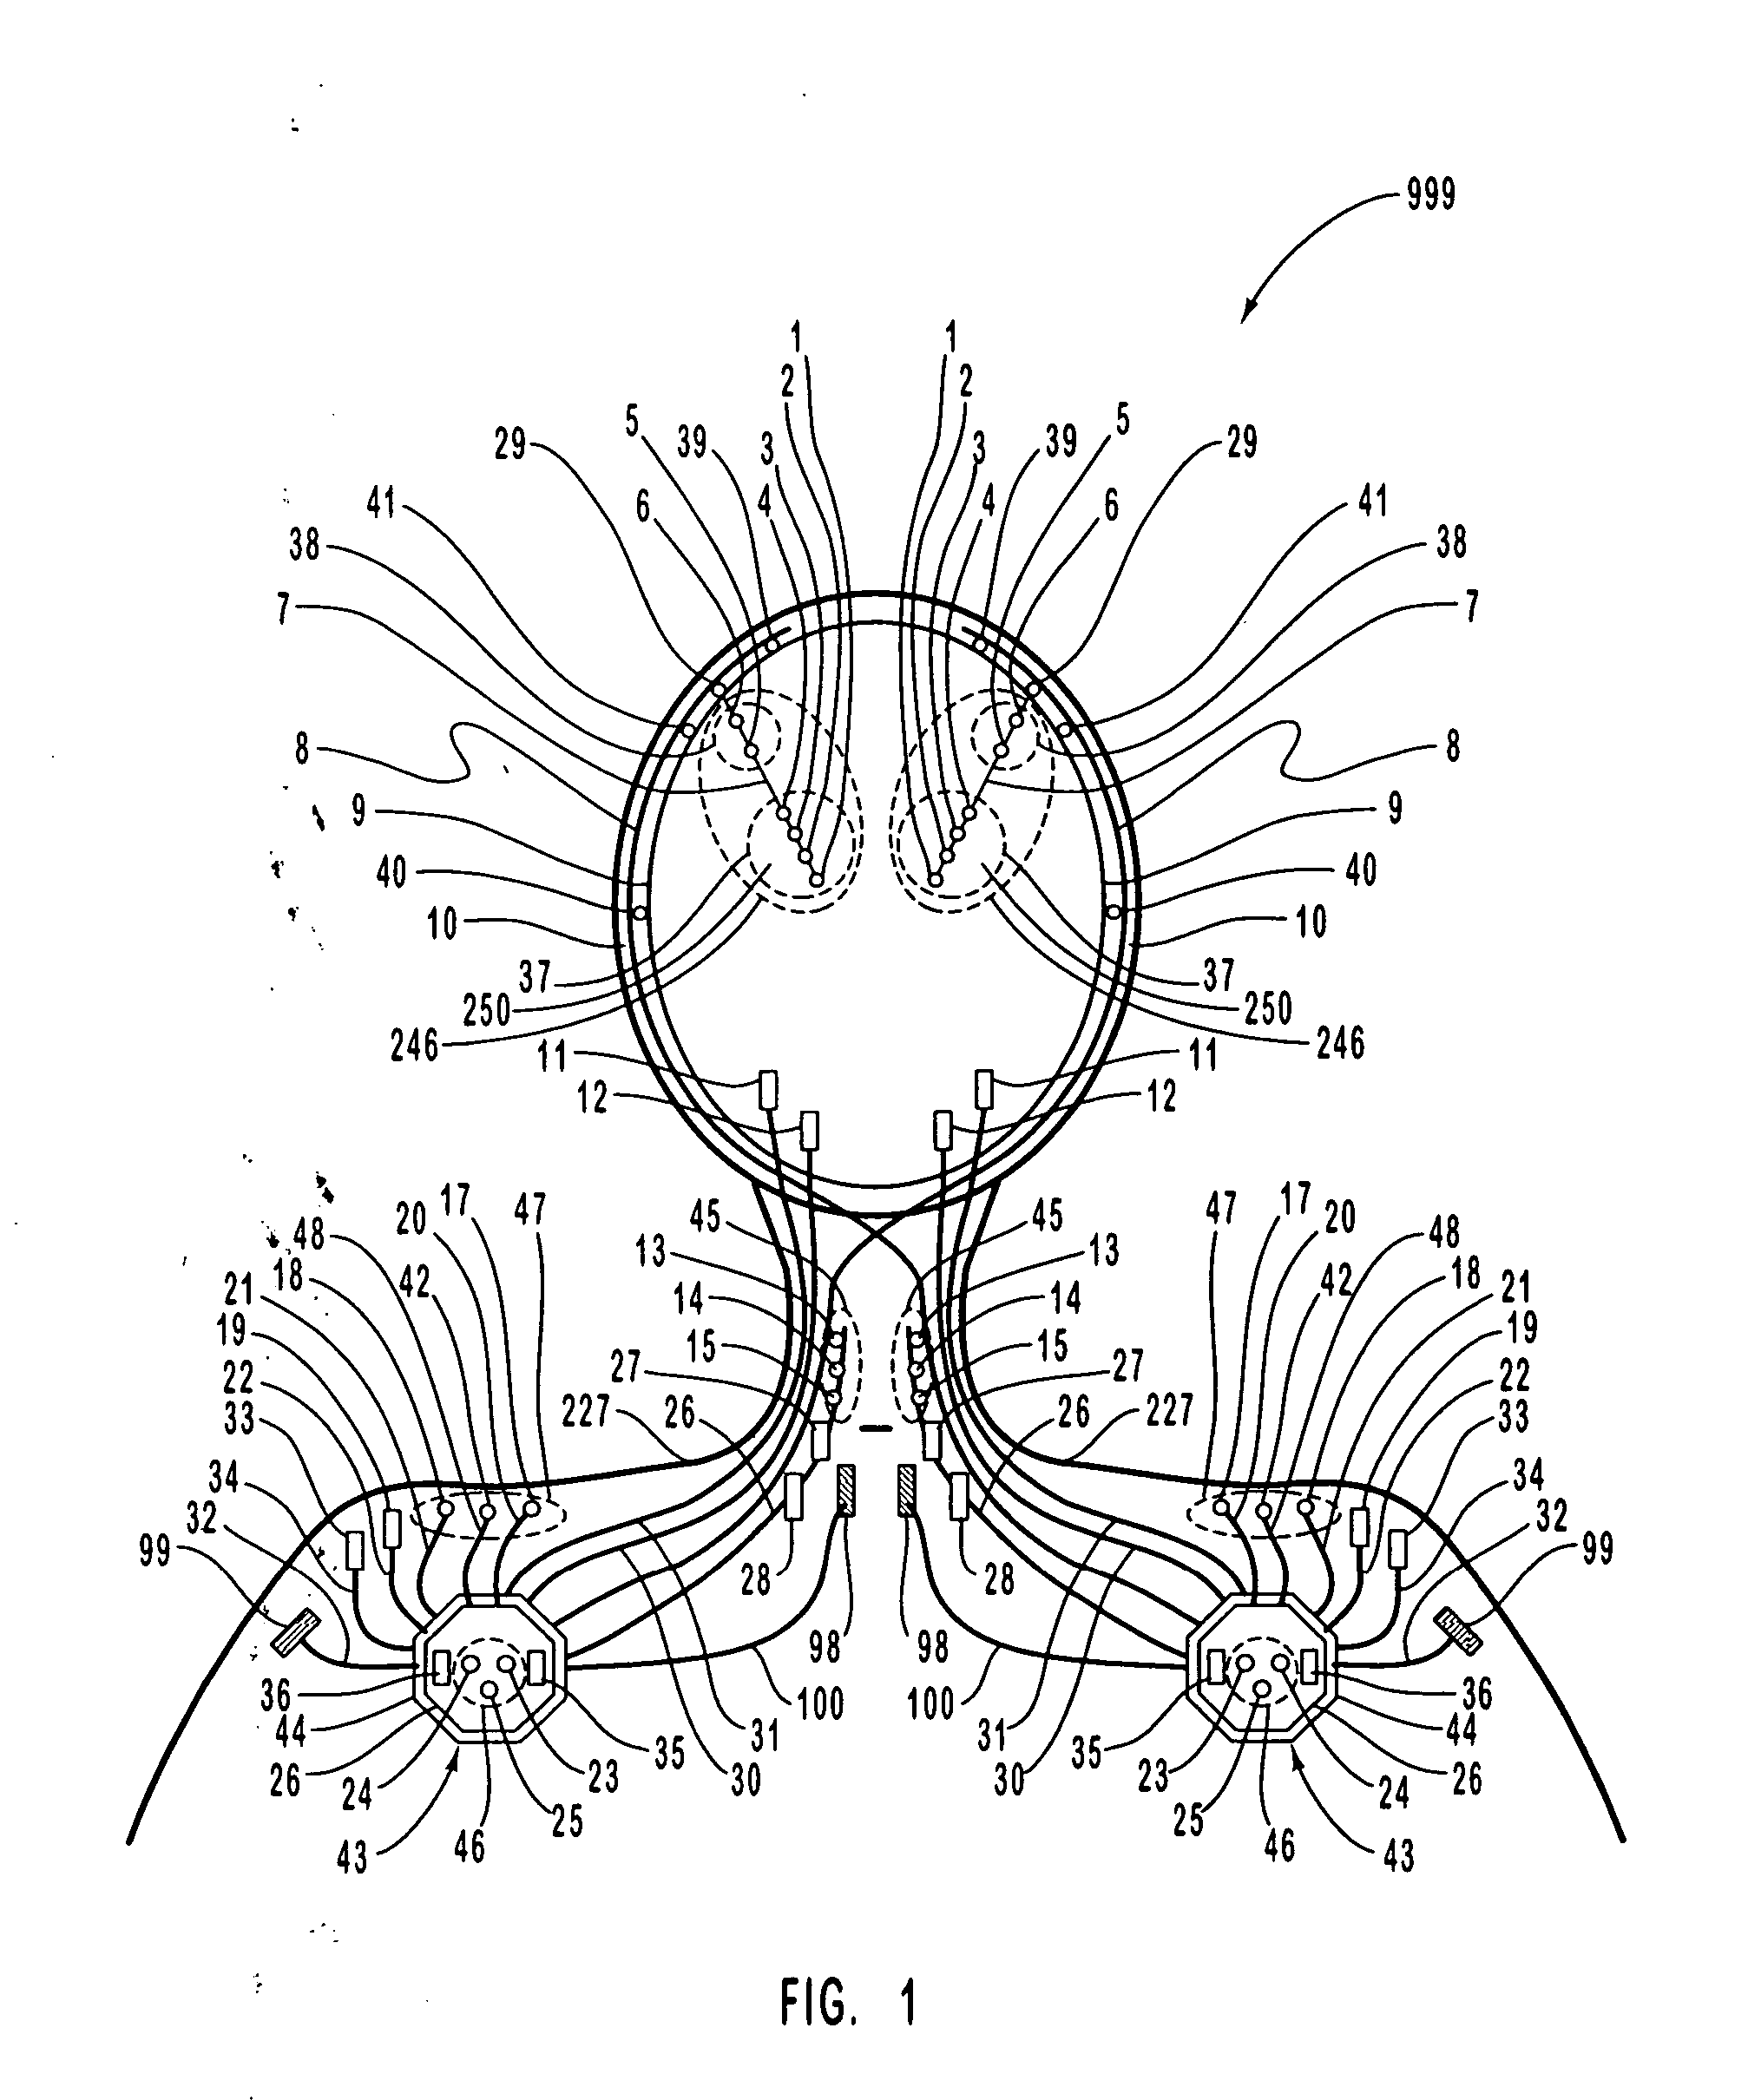 Apparatus and method for closed-loop intracranial stimulation for optimal control of neurological disease